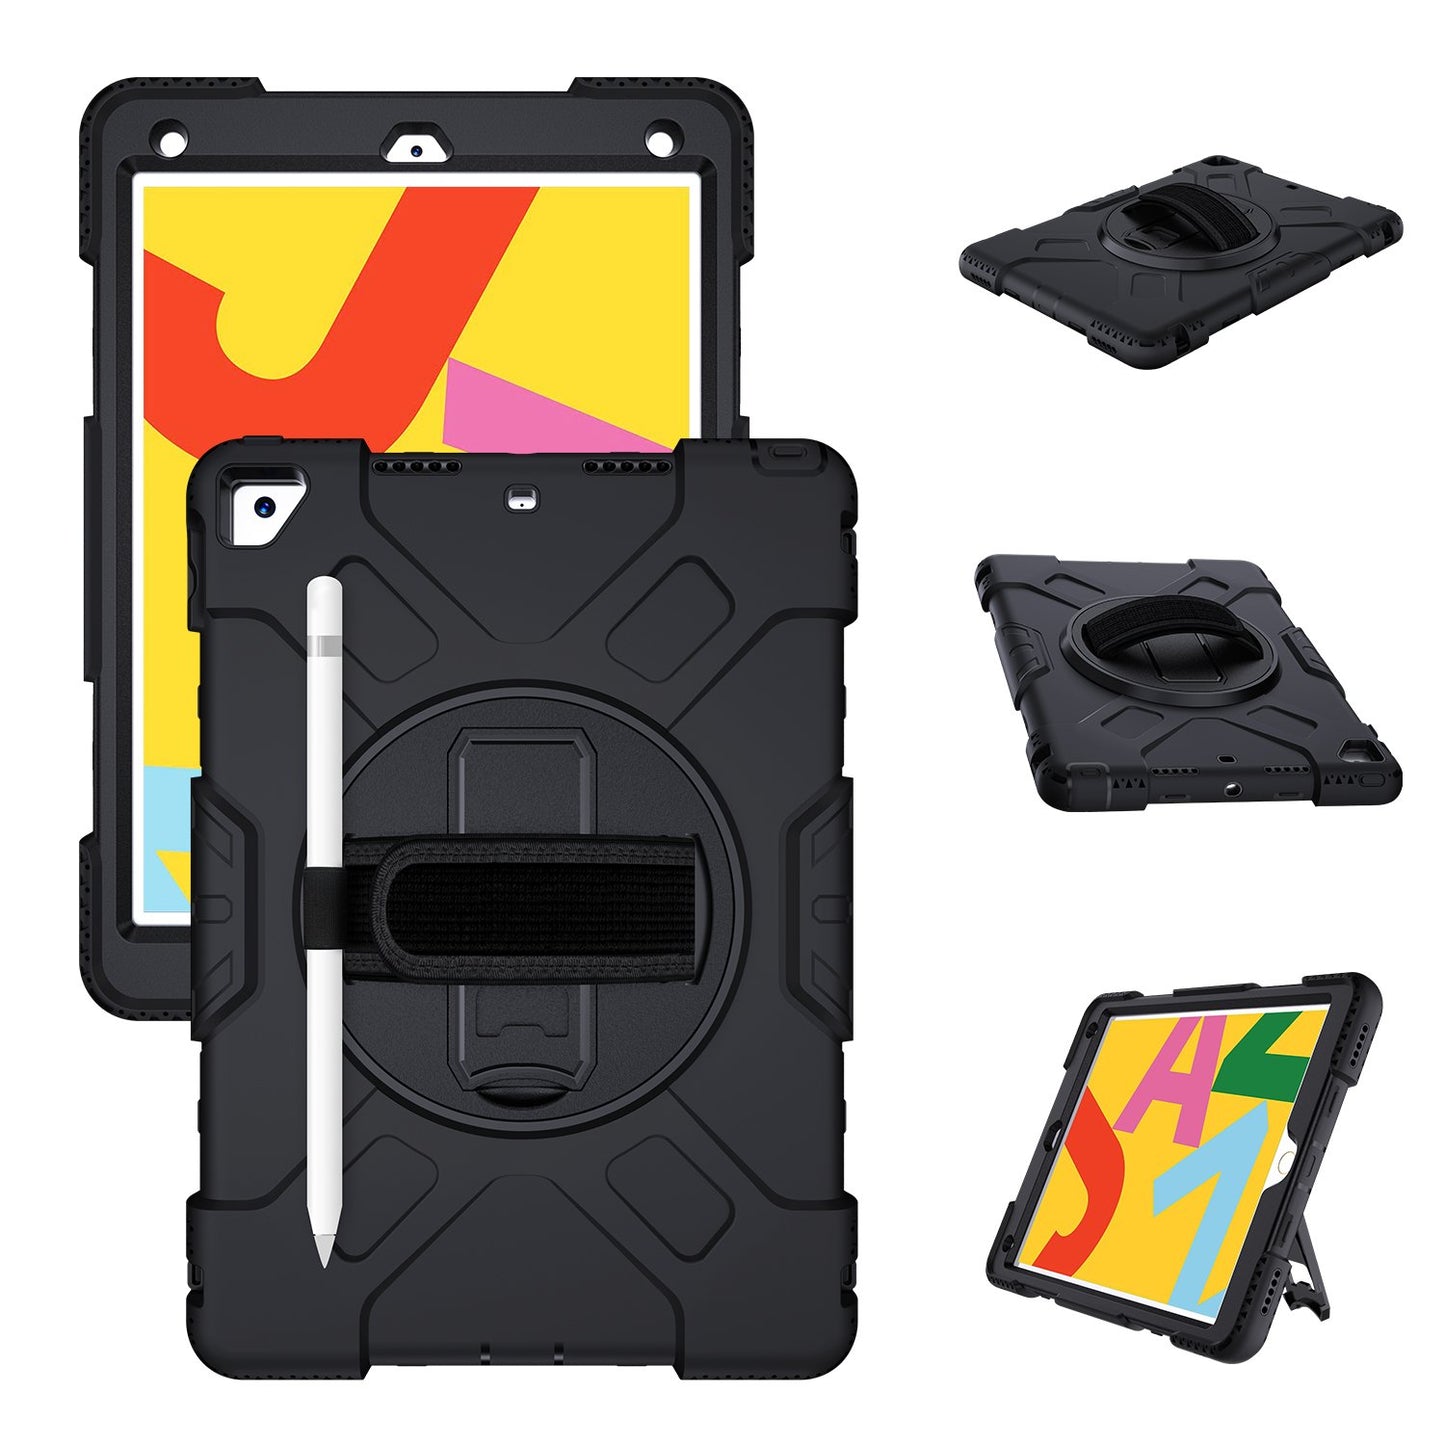 Tough On iPad Air 3 10.5 inch Case Rugged Protection Black